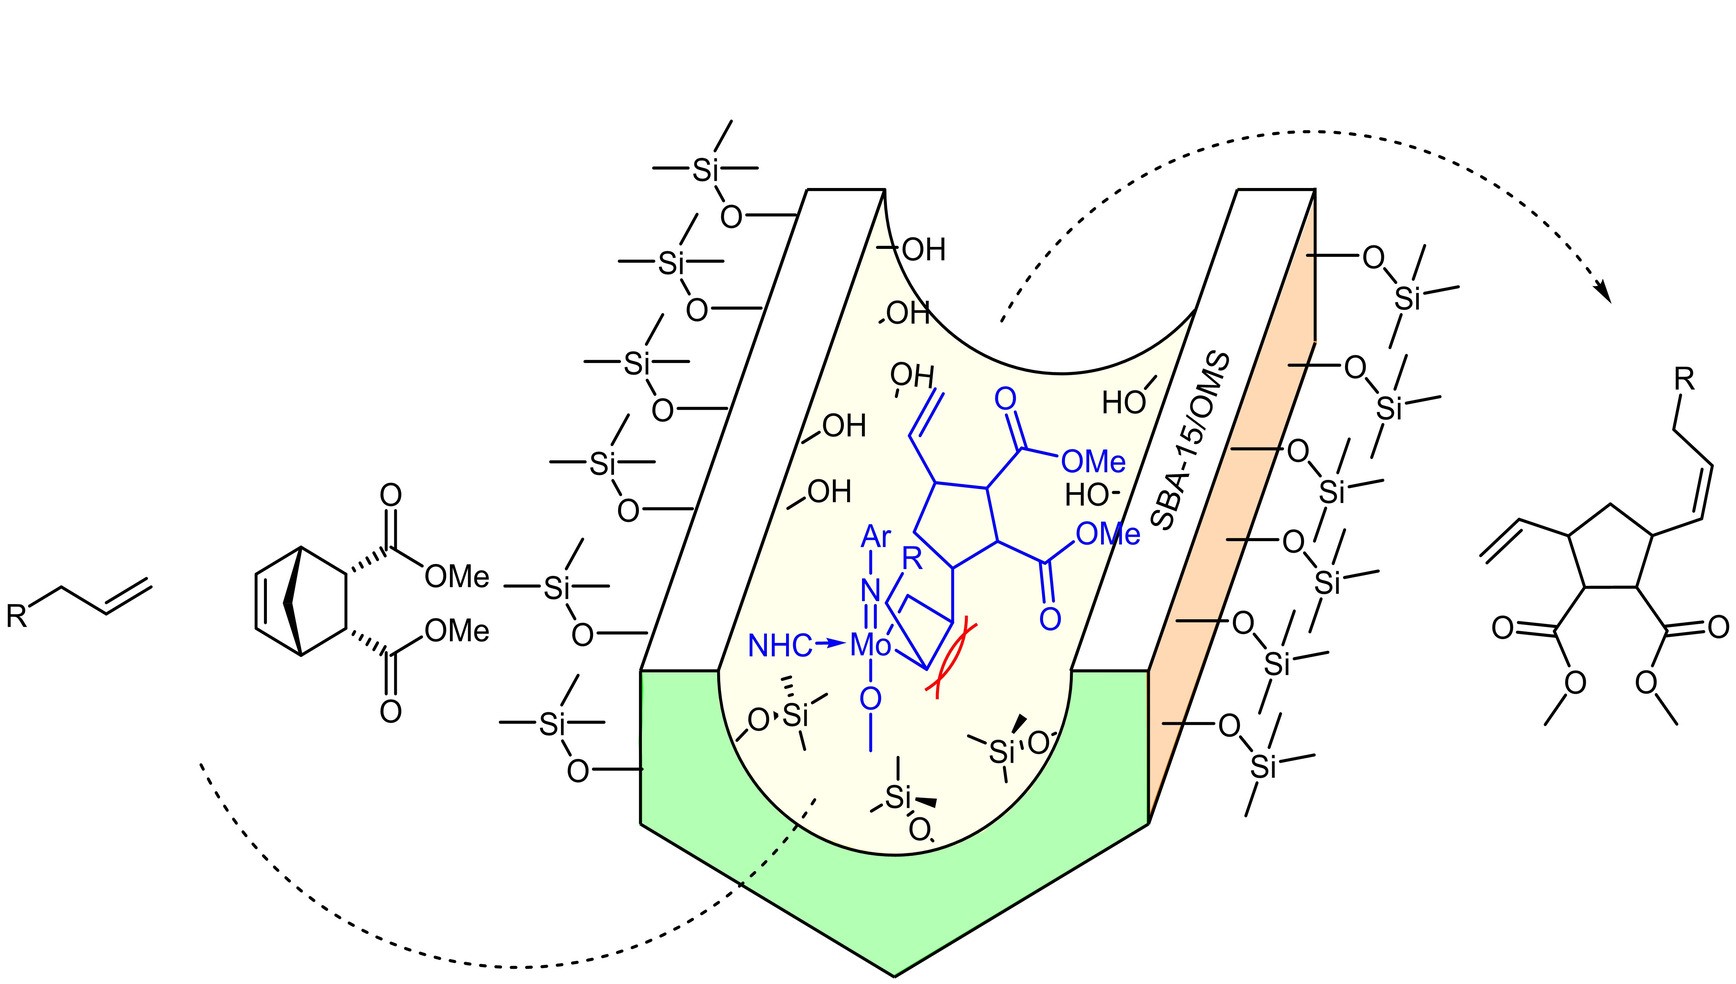 Cationic Molybdenum Imido Alkylidene N-Heterocyclic Carbene Complexes Confined in Mesoporous Silica: Tuning Transition States Towards Z-Selective Ring-Opening Cross-Metathesis